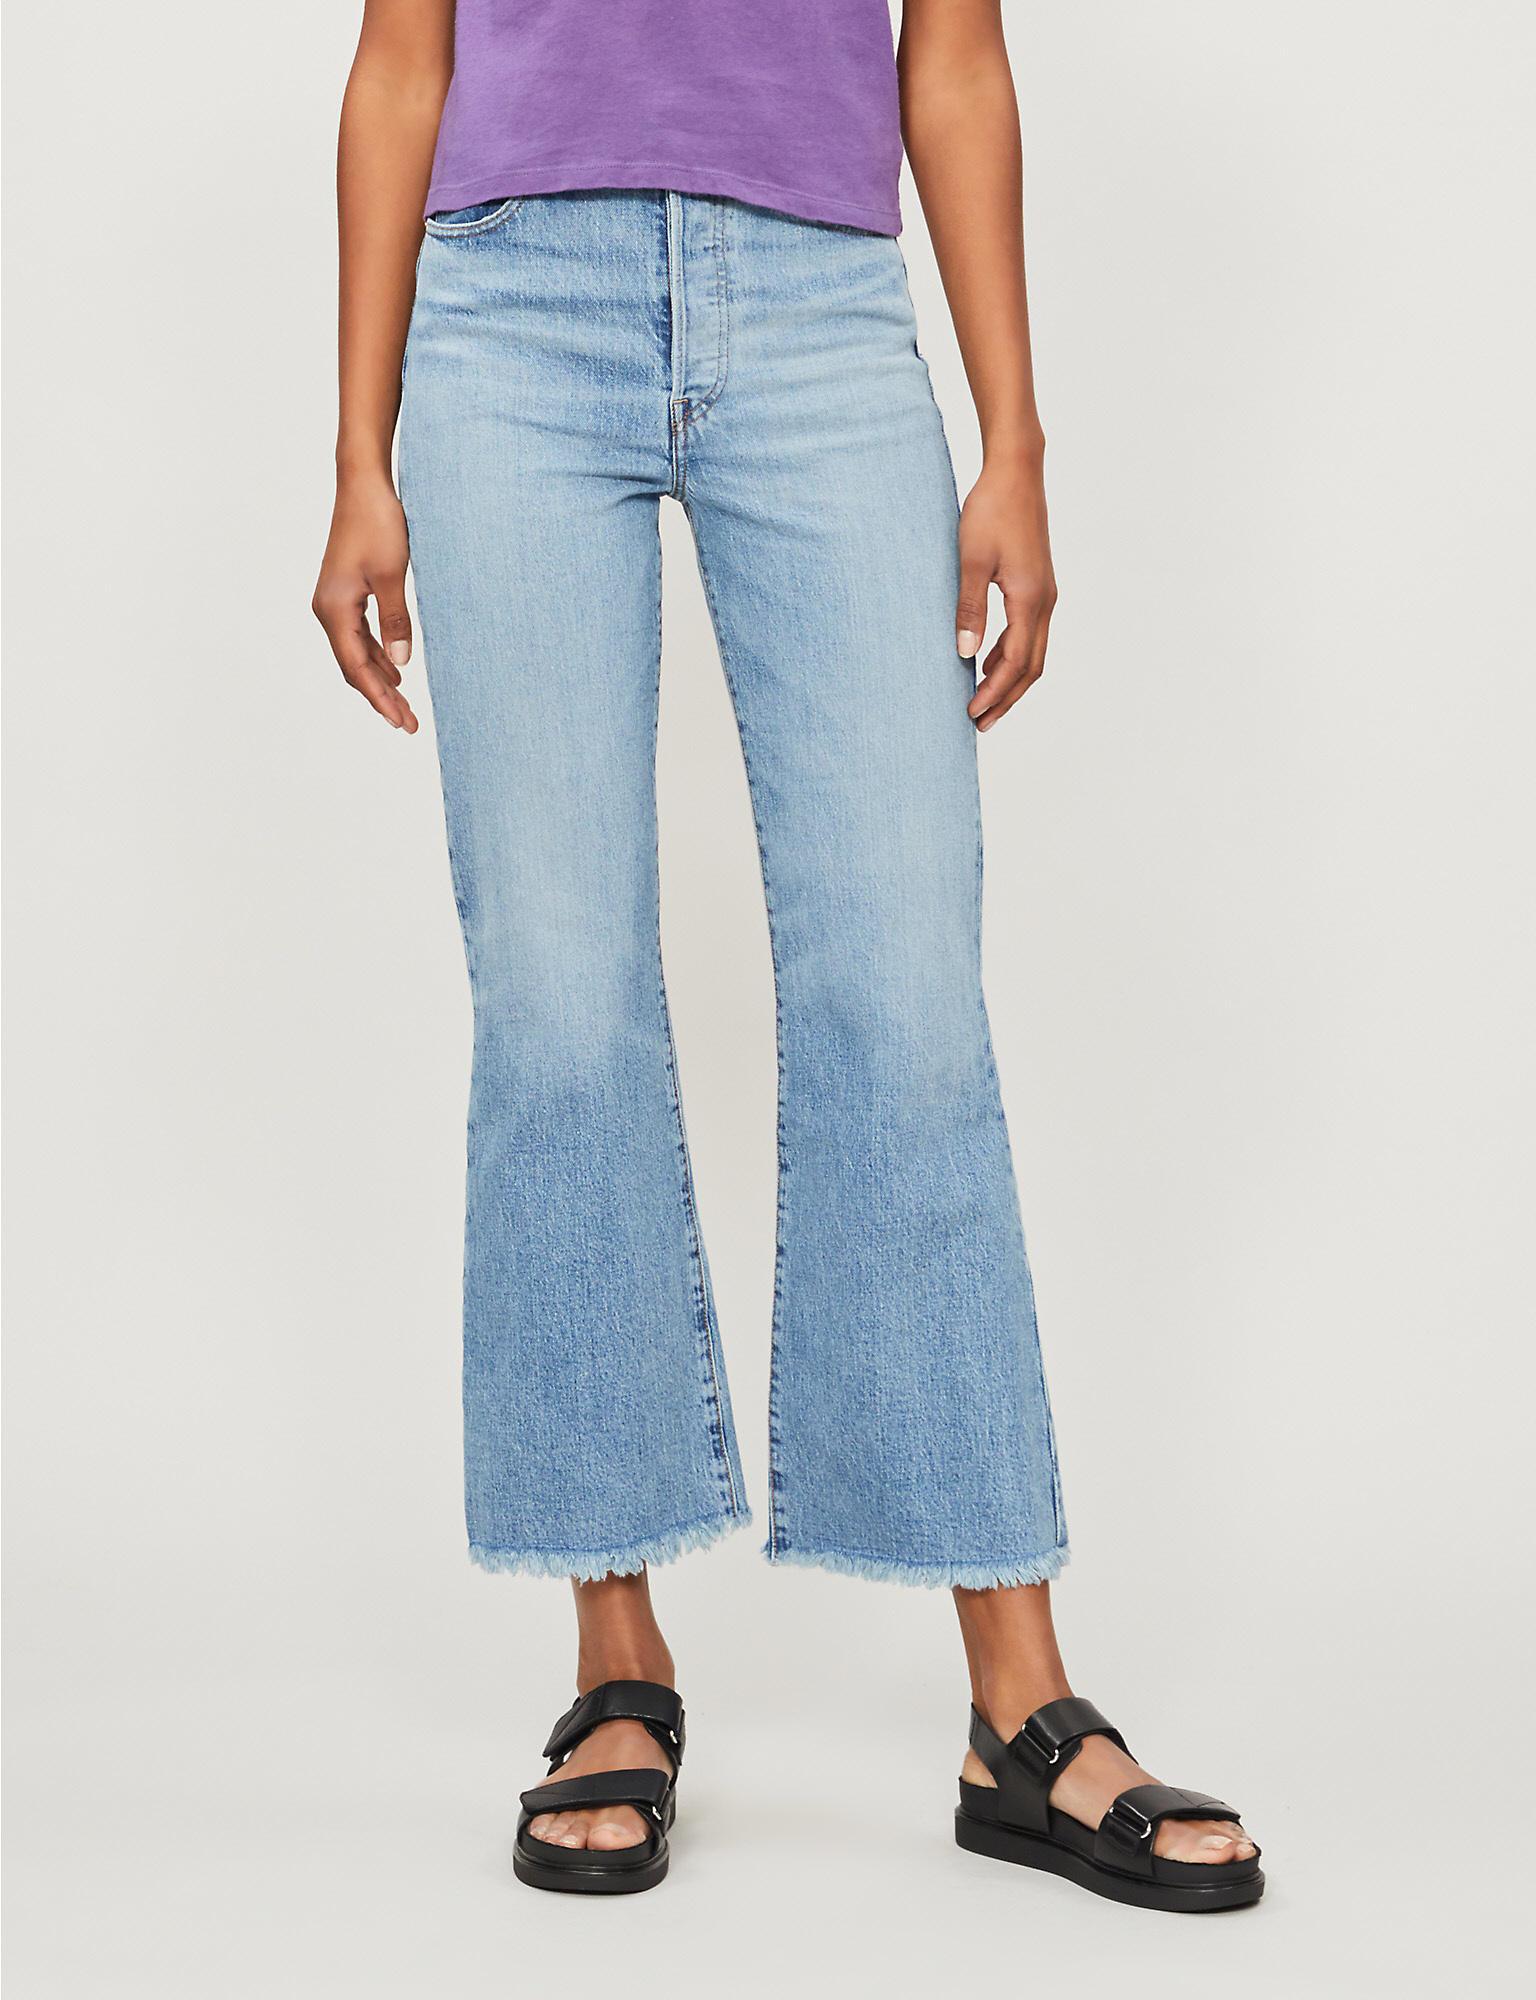 Levi's Denim Ribcage High-rise Flare Jeans in Blue - Lyst